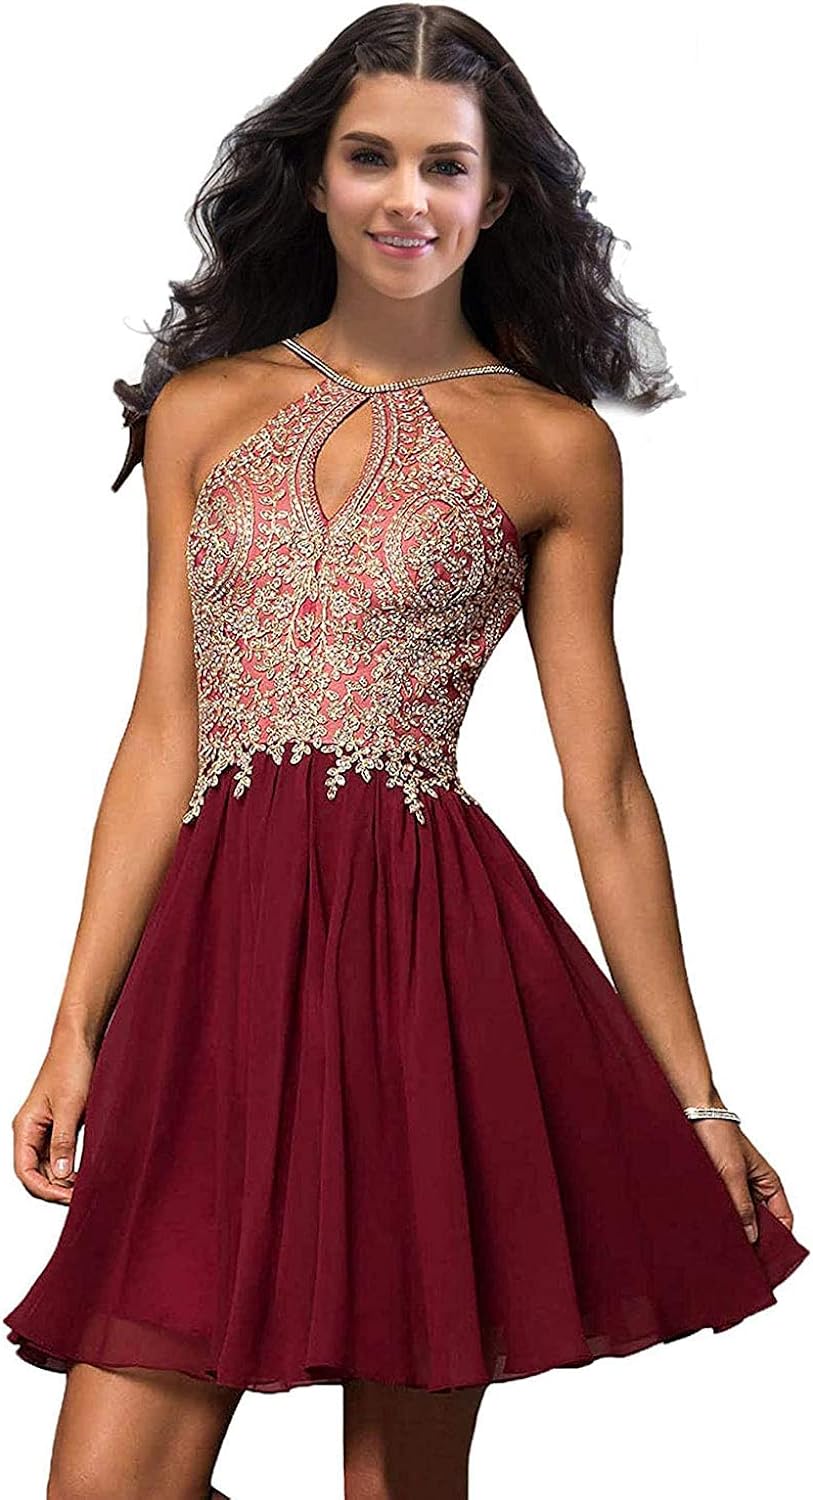 Homecoming Dresses From Amazon